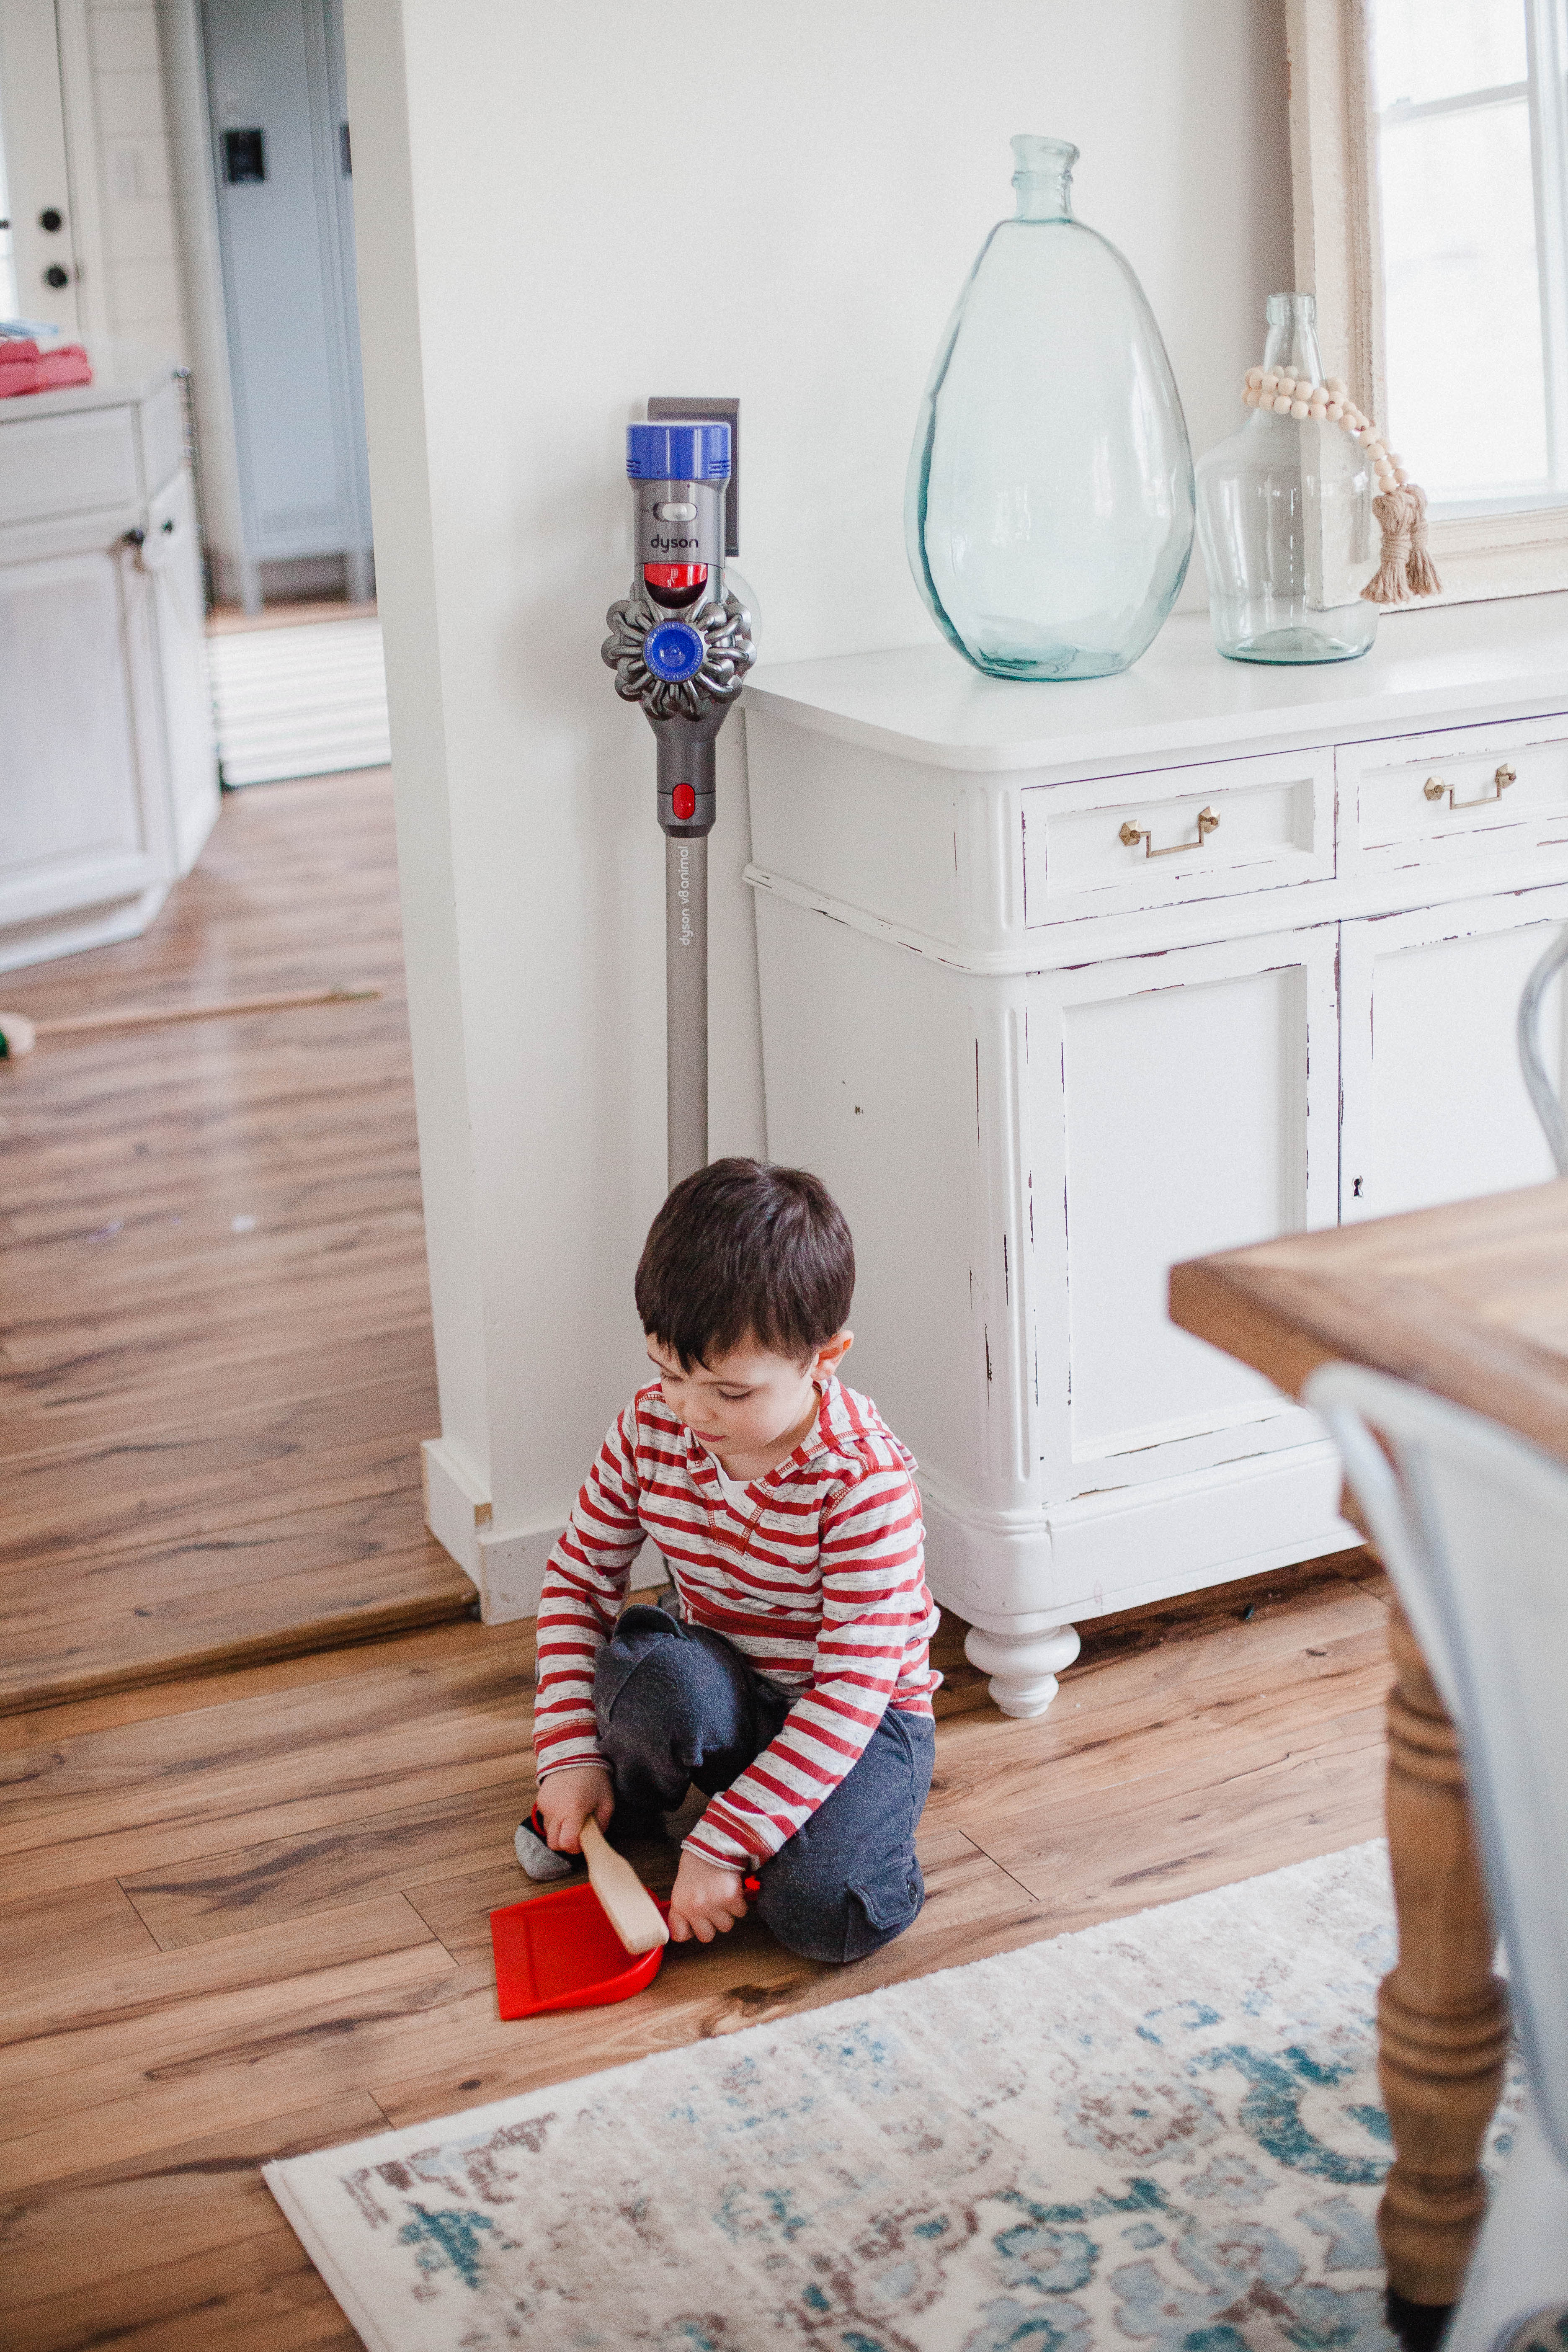 Life and style blogger Lauren McBride shares her cleaning routine as a new family of five, and some tips and tricks that help her maintain the home.